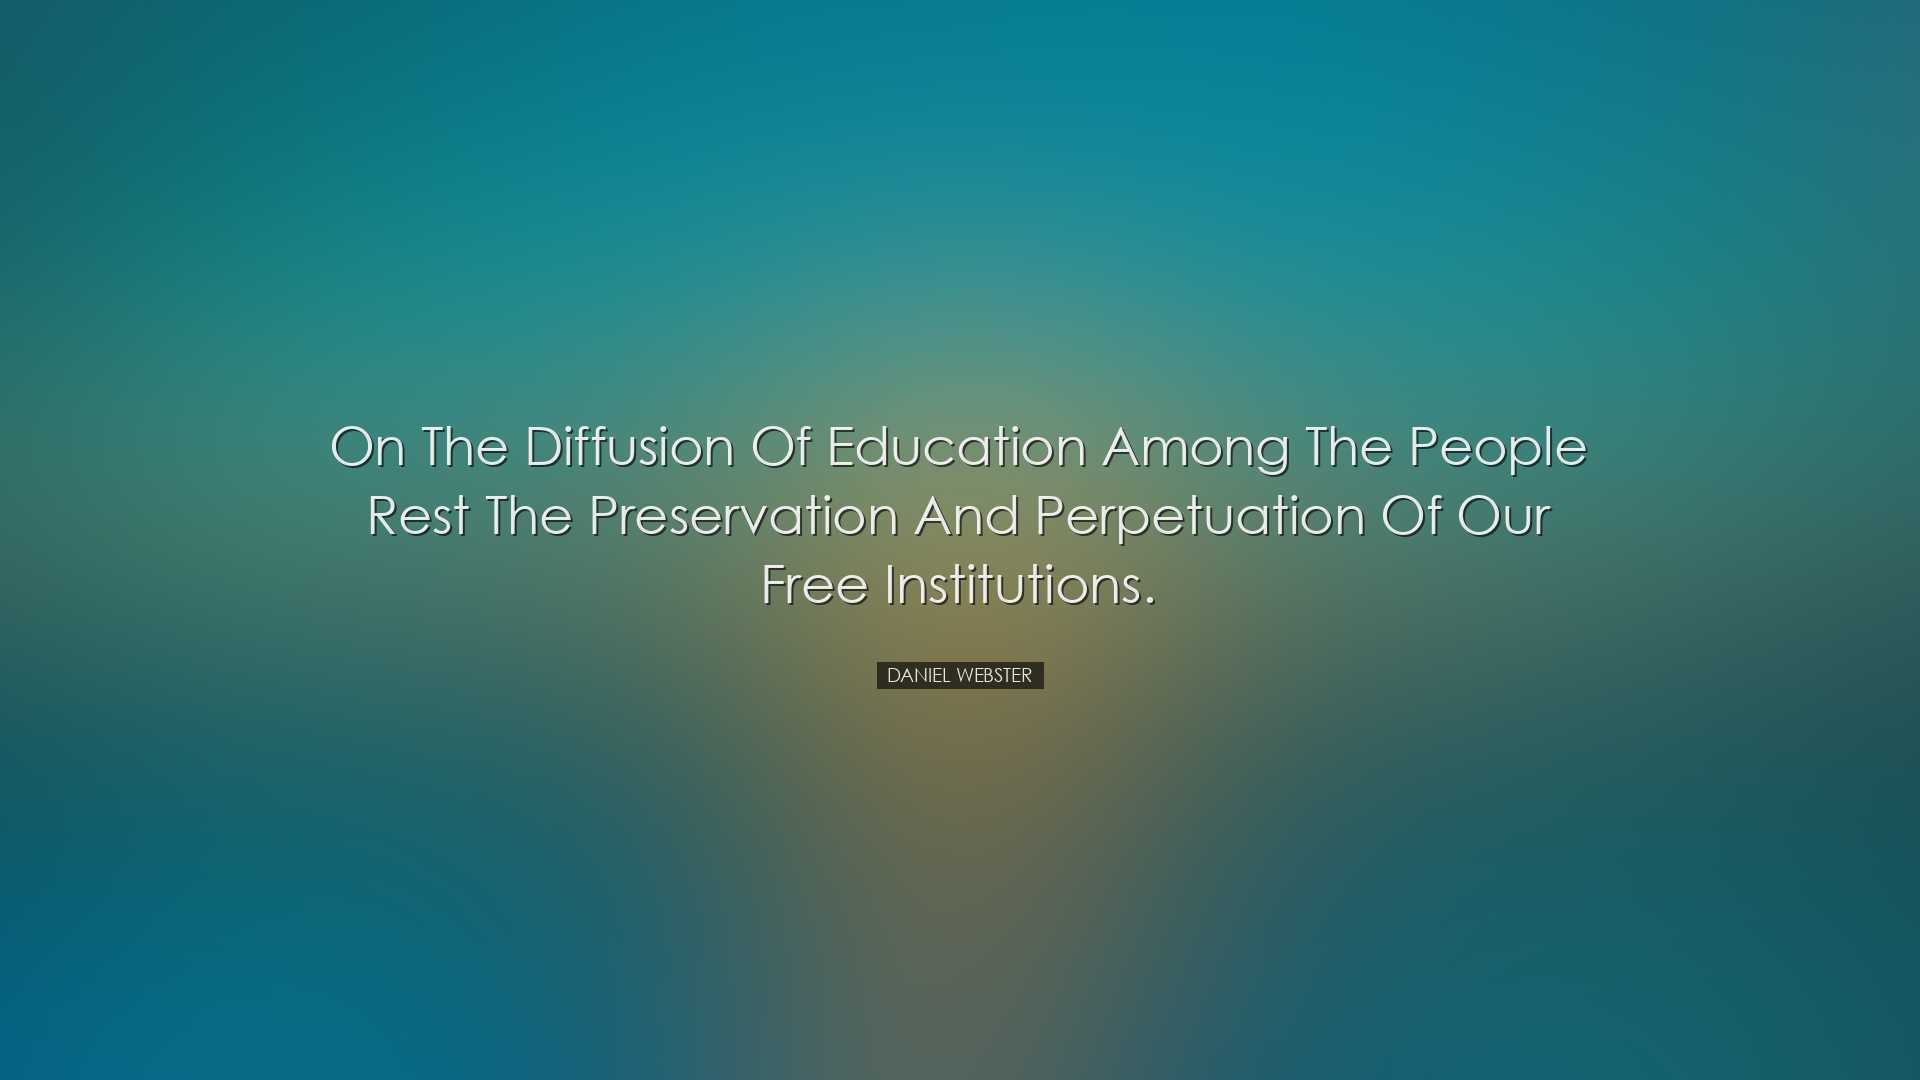 On the diffusion of education among the people rest the preservati